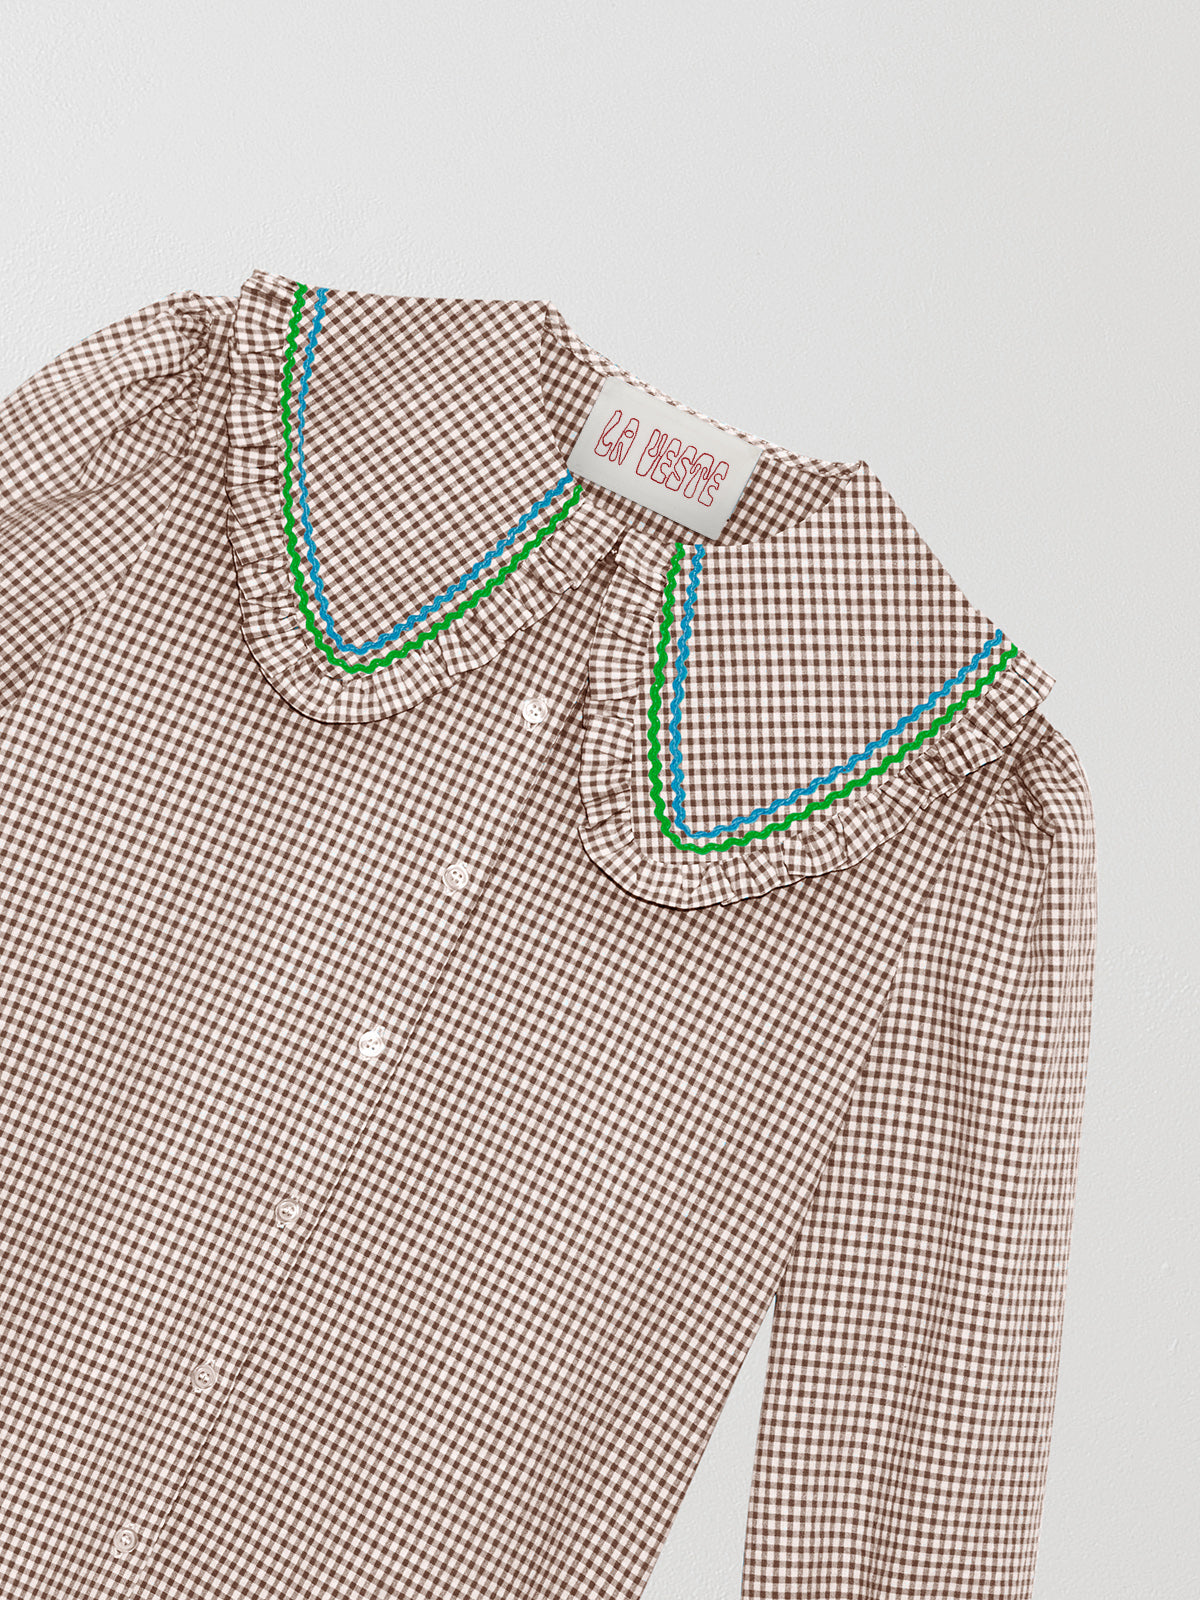 Brown and white vichy check shirt made of cotton with blue and green yarn detail on the collar